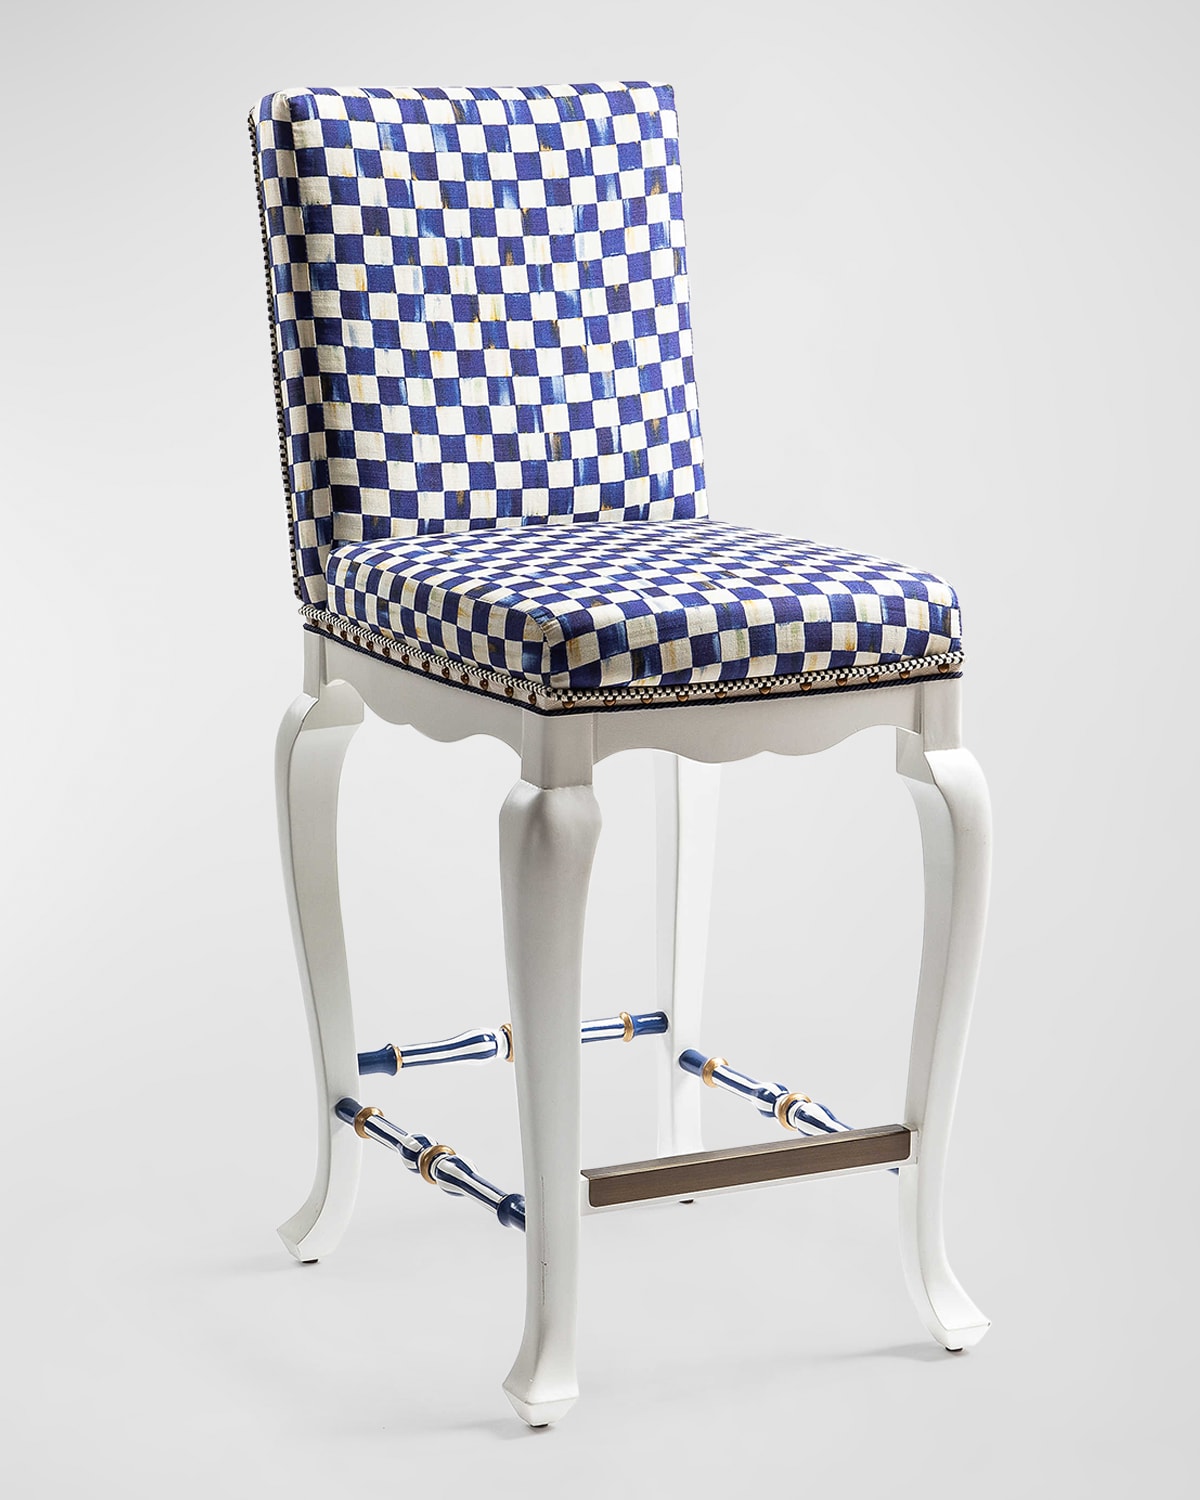 Mackenzie-childs Royal Check Counter Stool With Back